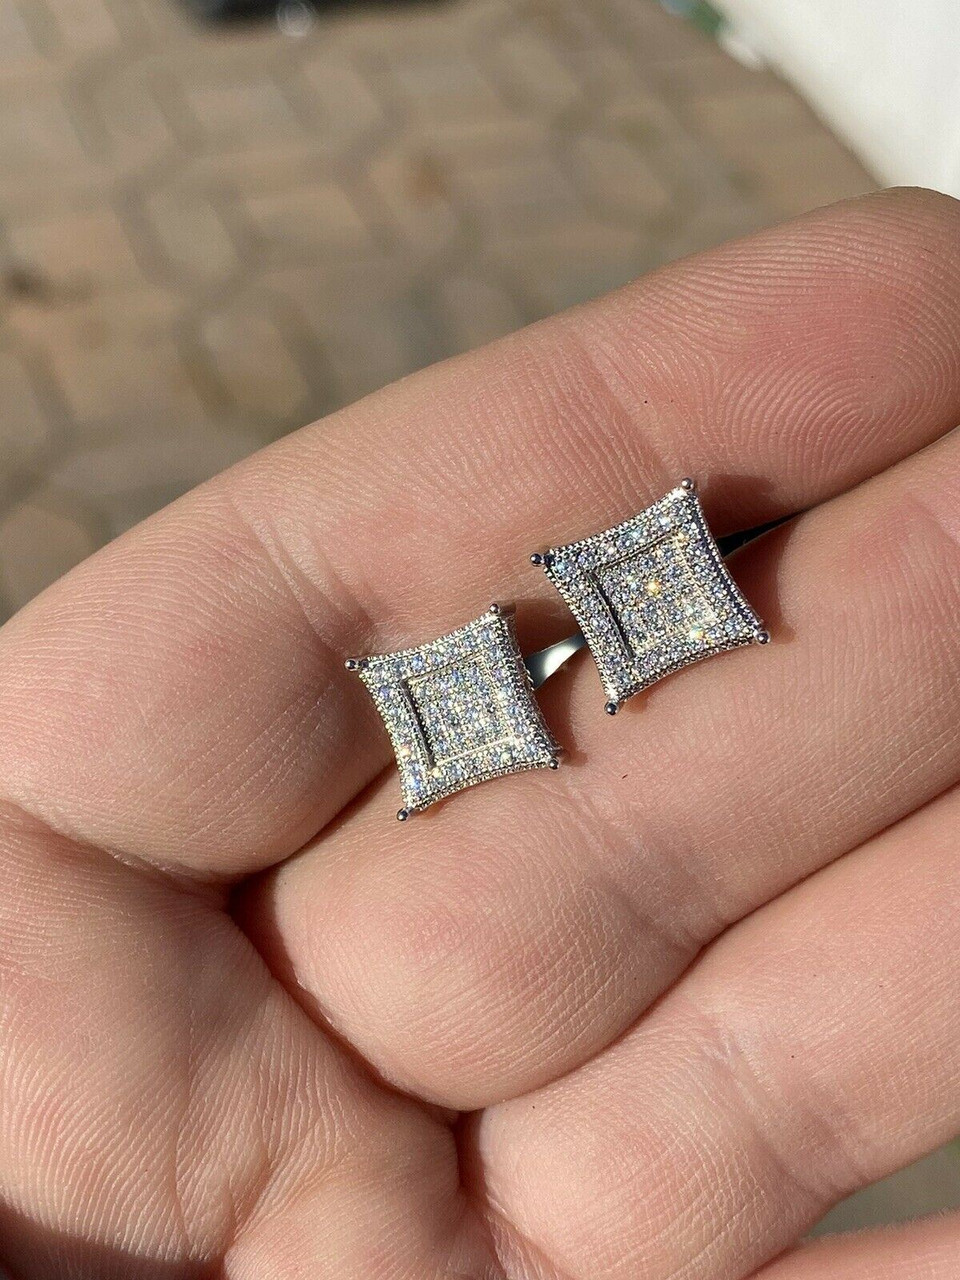 4mm Sterling Silver Round Cut CZ Earring Studs